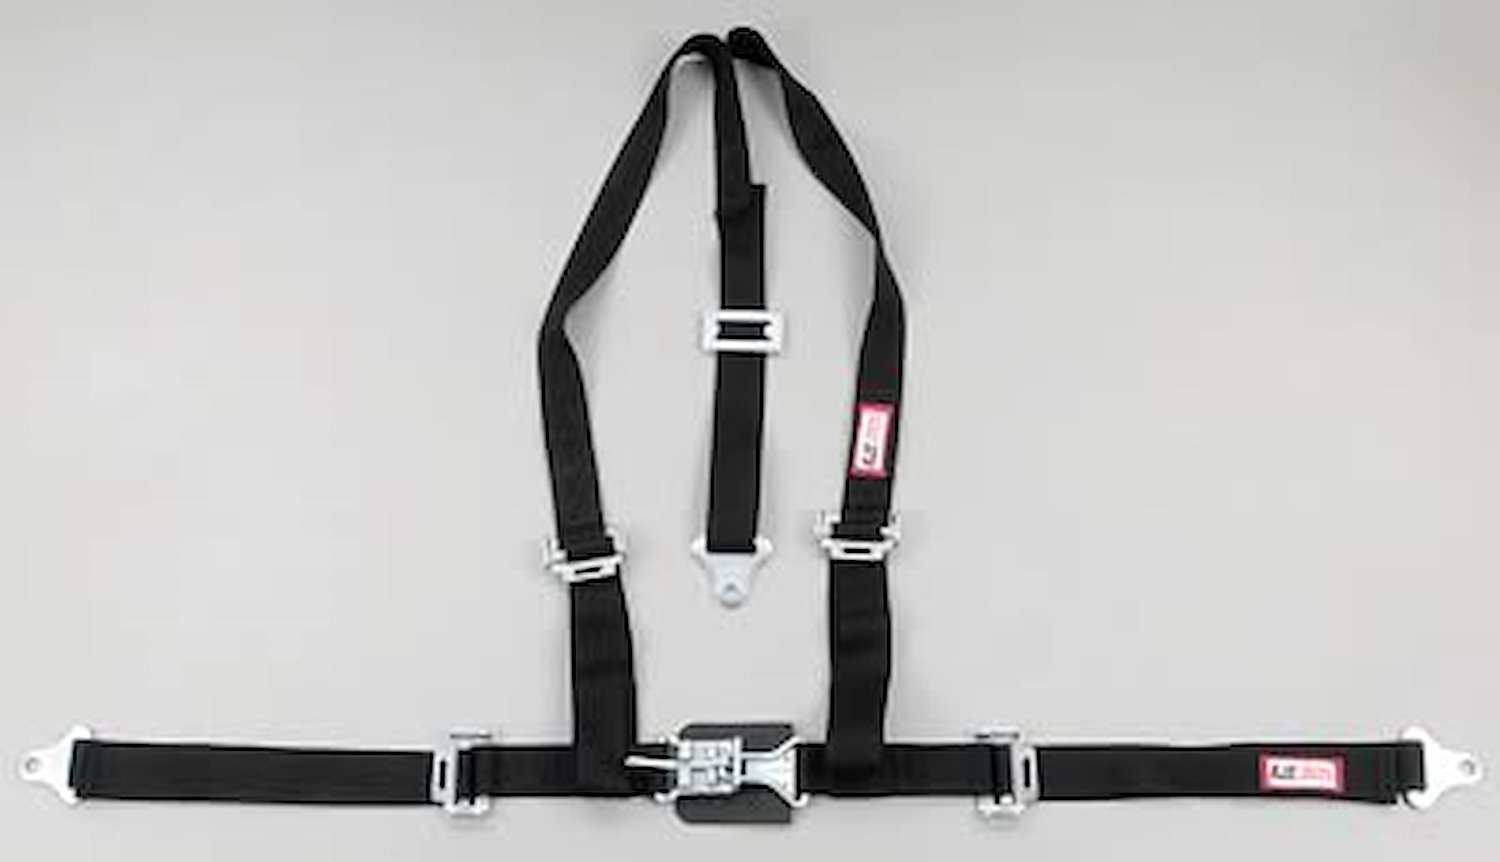 NON-SFI L&L HARNESS 2 PULL DOWN Lap Belt SNAP SEWN IN 2 S.H. Y FLOOR Mount w/STERNUM STRAP WRAP/SNAP YELLOW